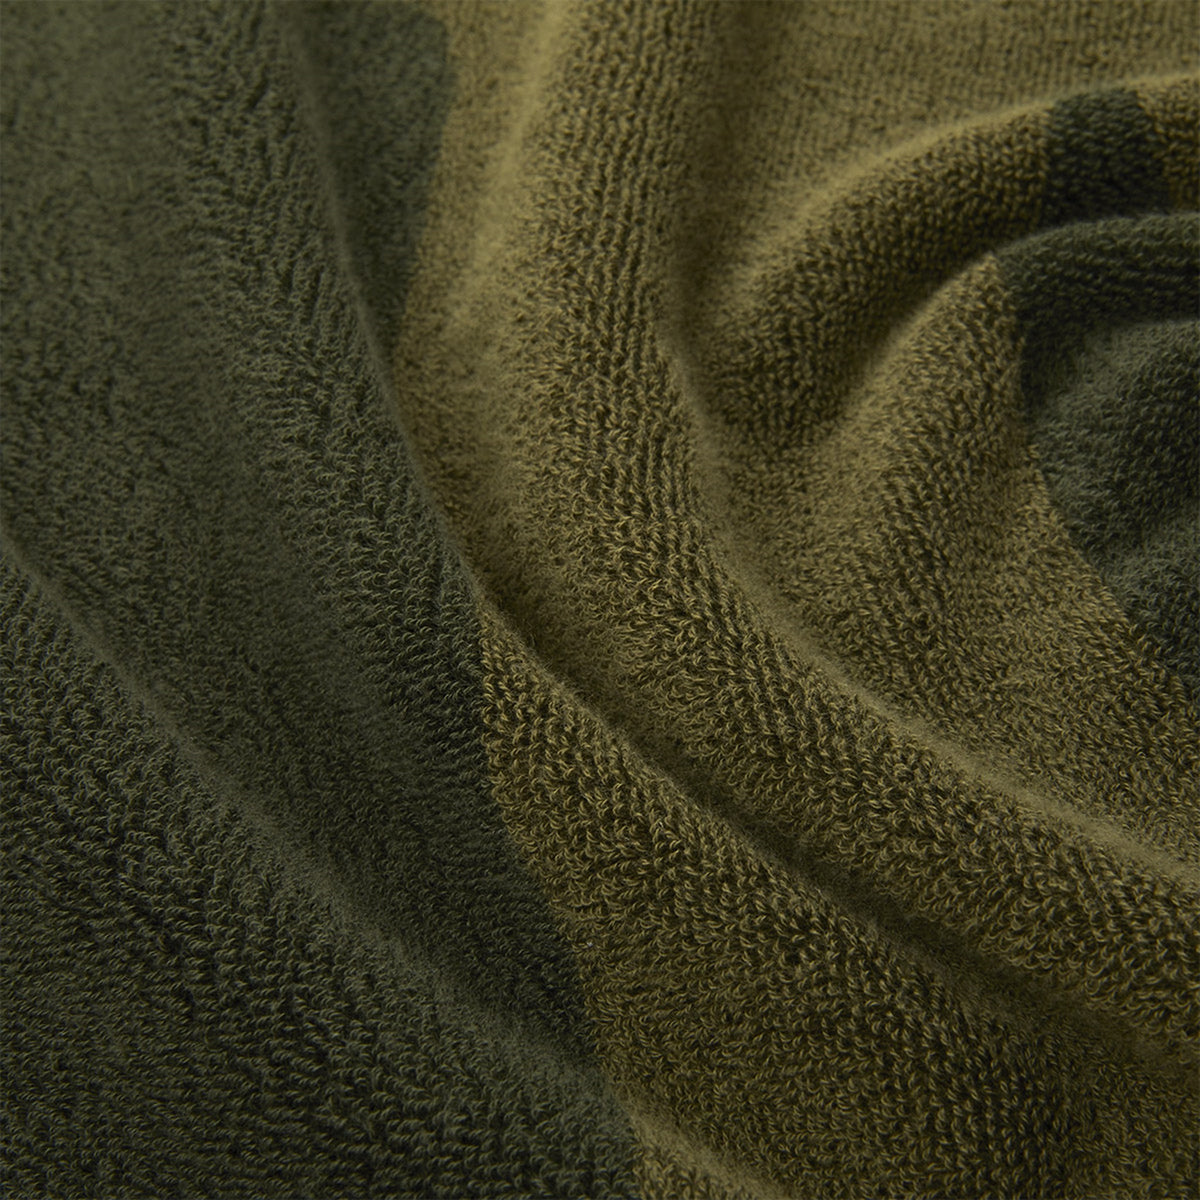 Close Up Image of Yves Delorme Griffe Beach Towel in Color Kaki